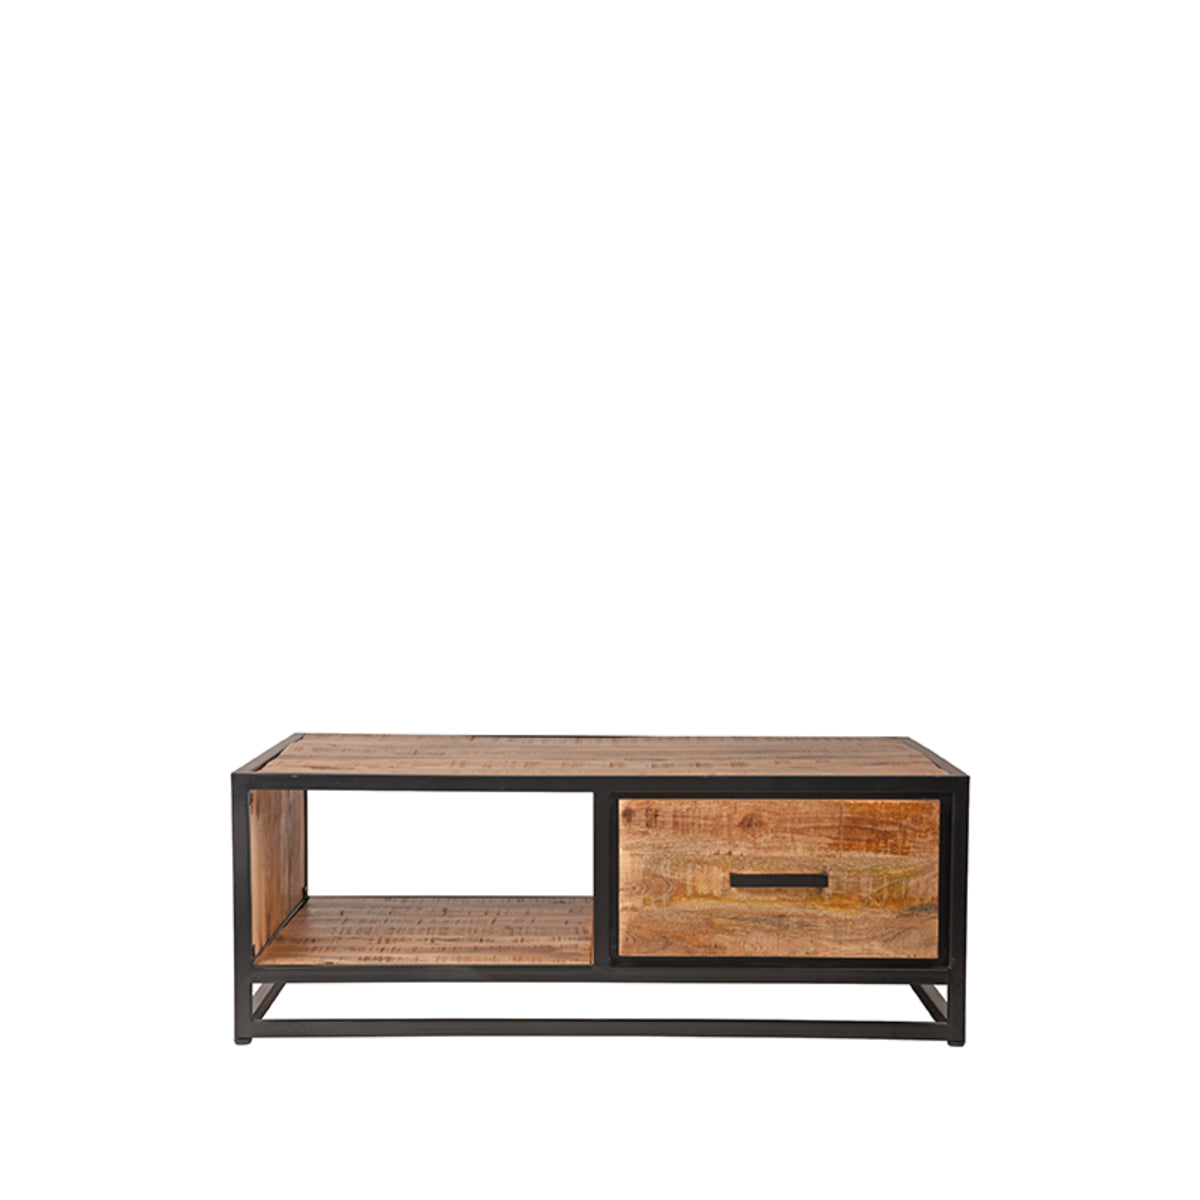 LABEL51 Coffee table Tampa - Rough - Mango wood